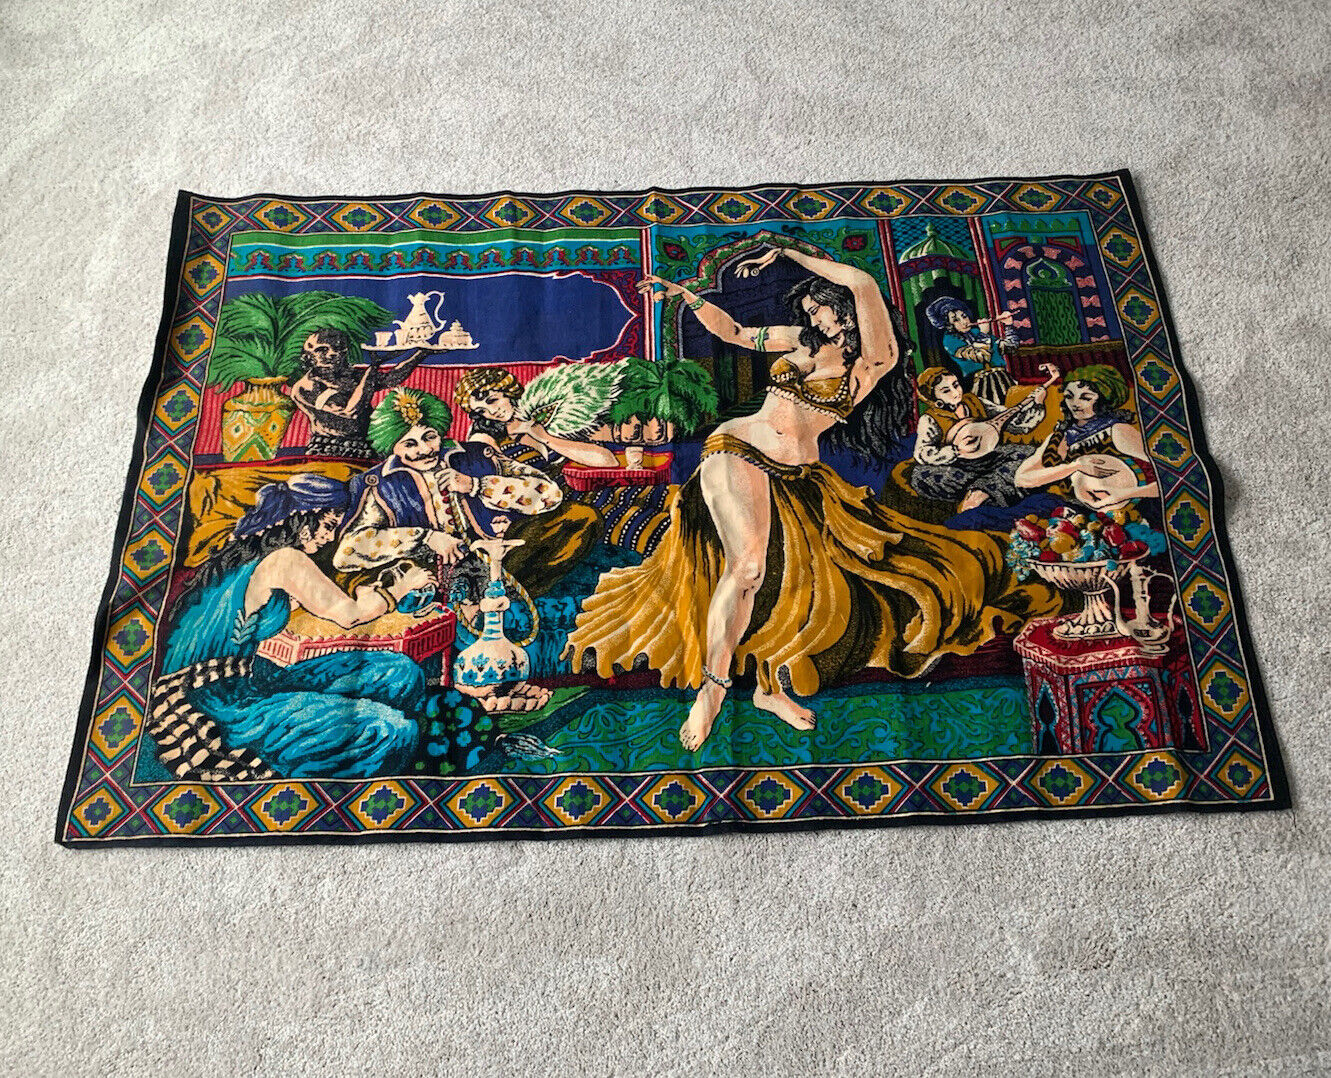 1960s VINTAGE Middle Eastern Tapestry - 58” x 39” - Belly Dancers & Musicians